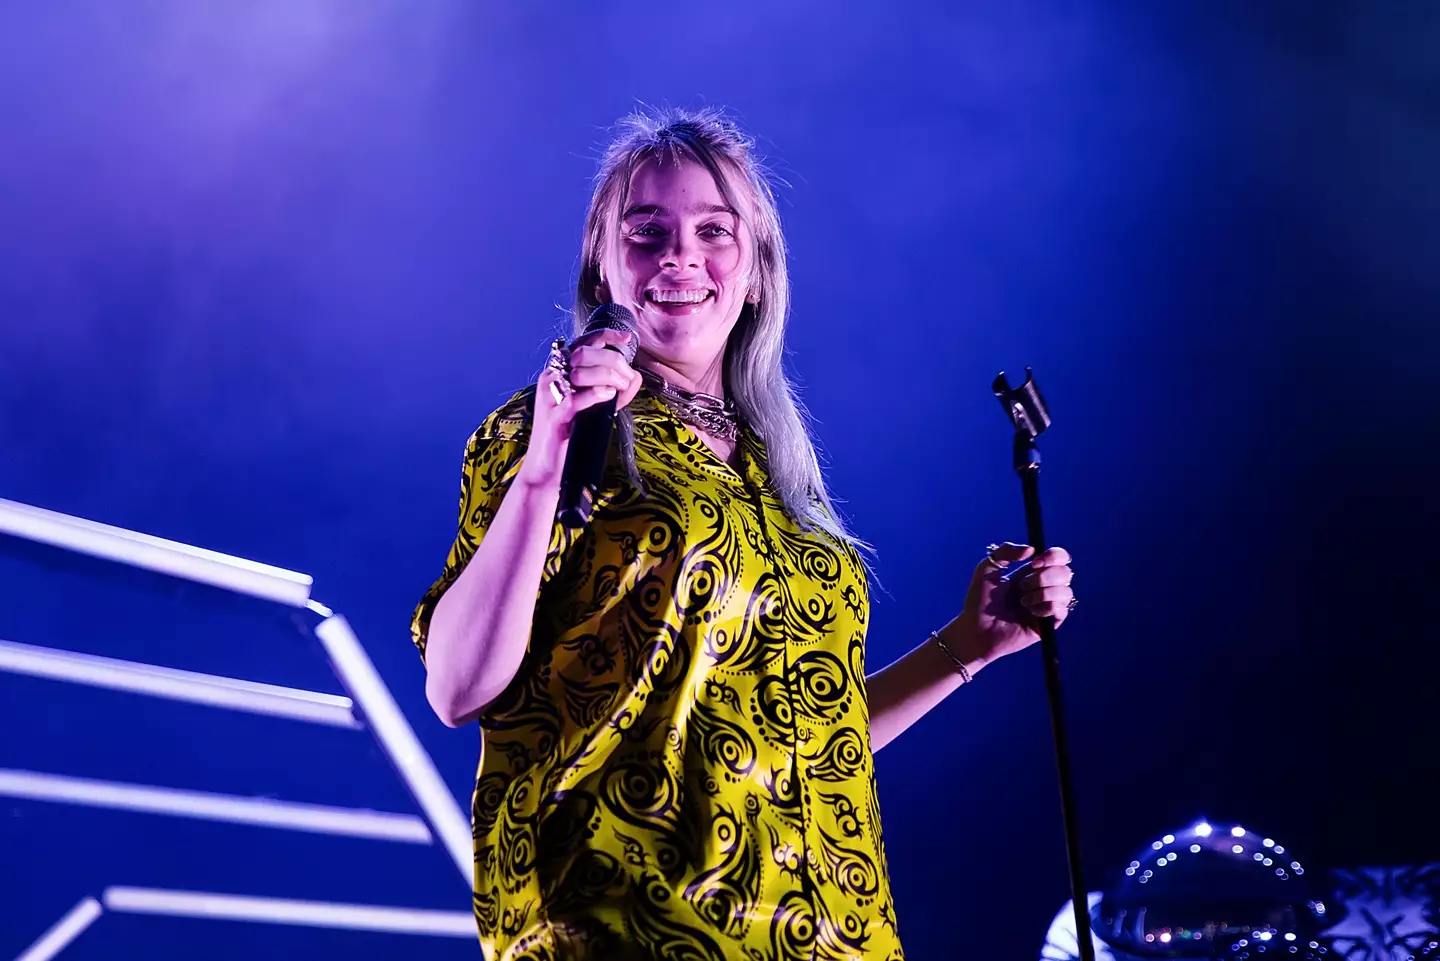 Billie is set to be the youngest ever headliner at Glastonbury.